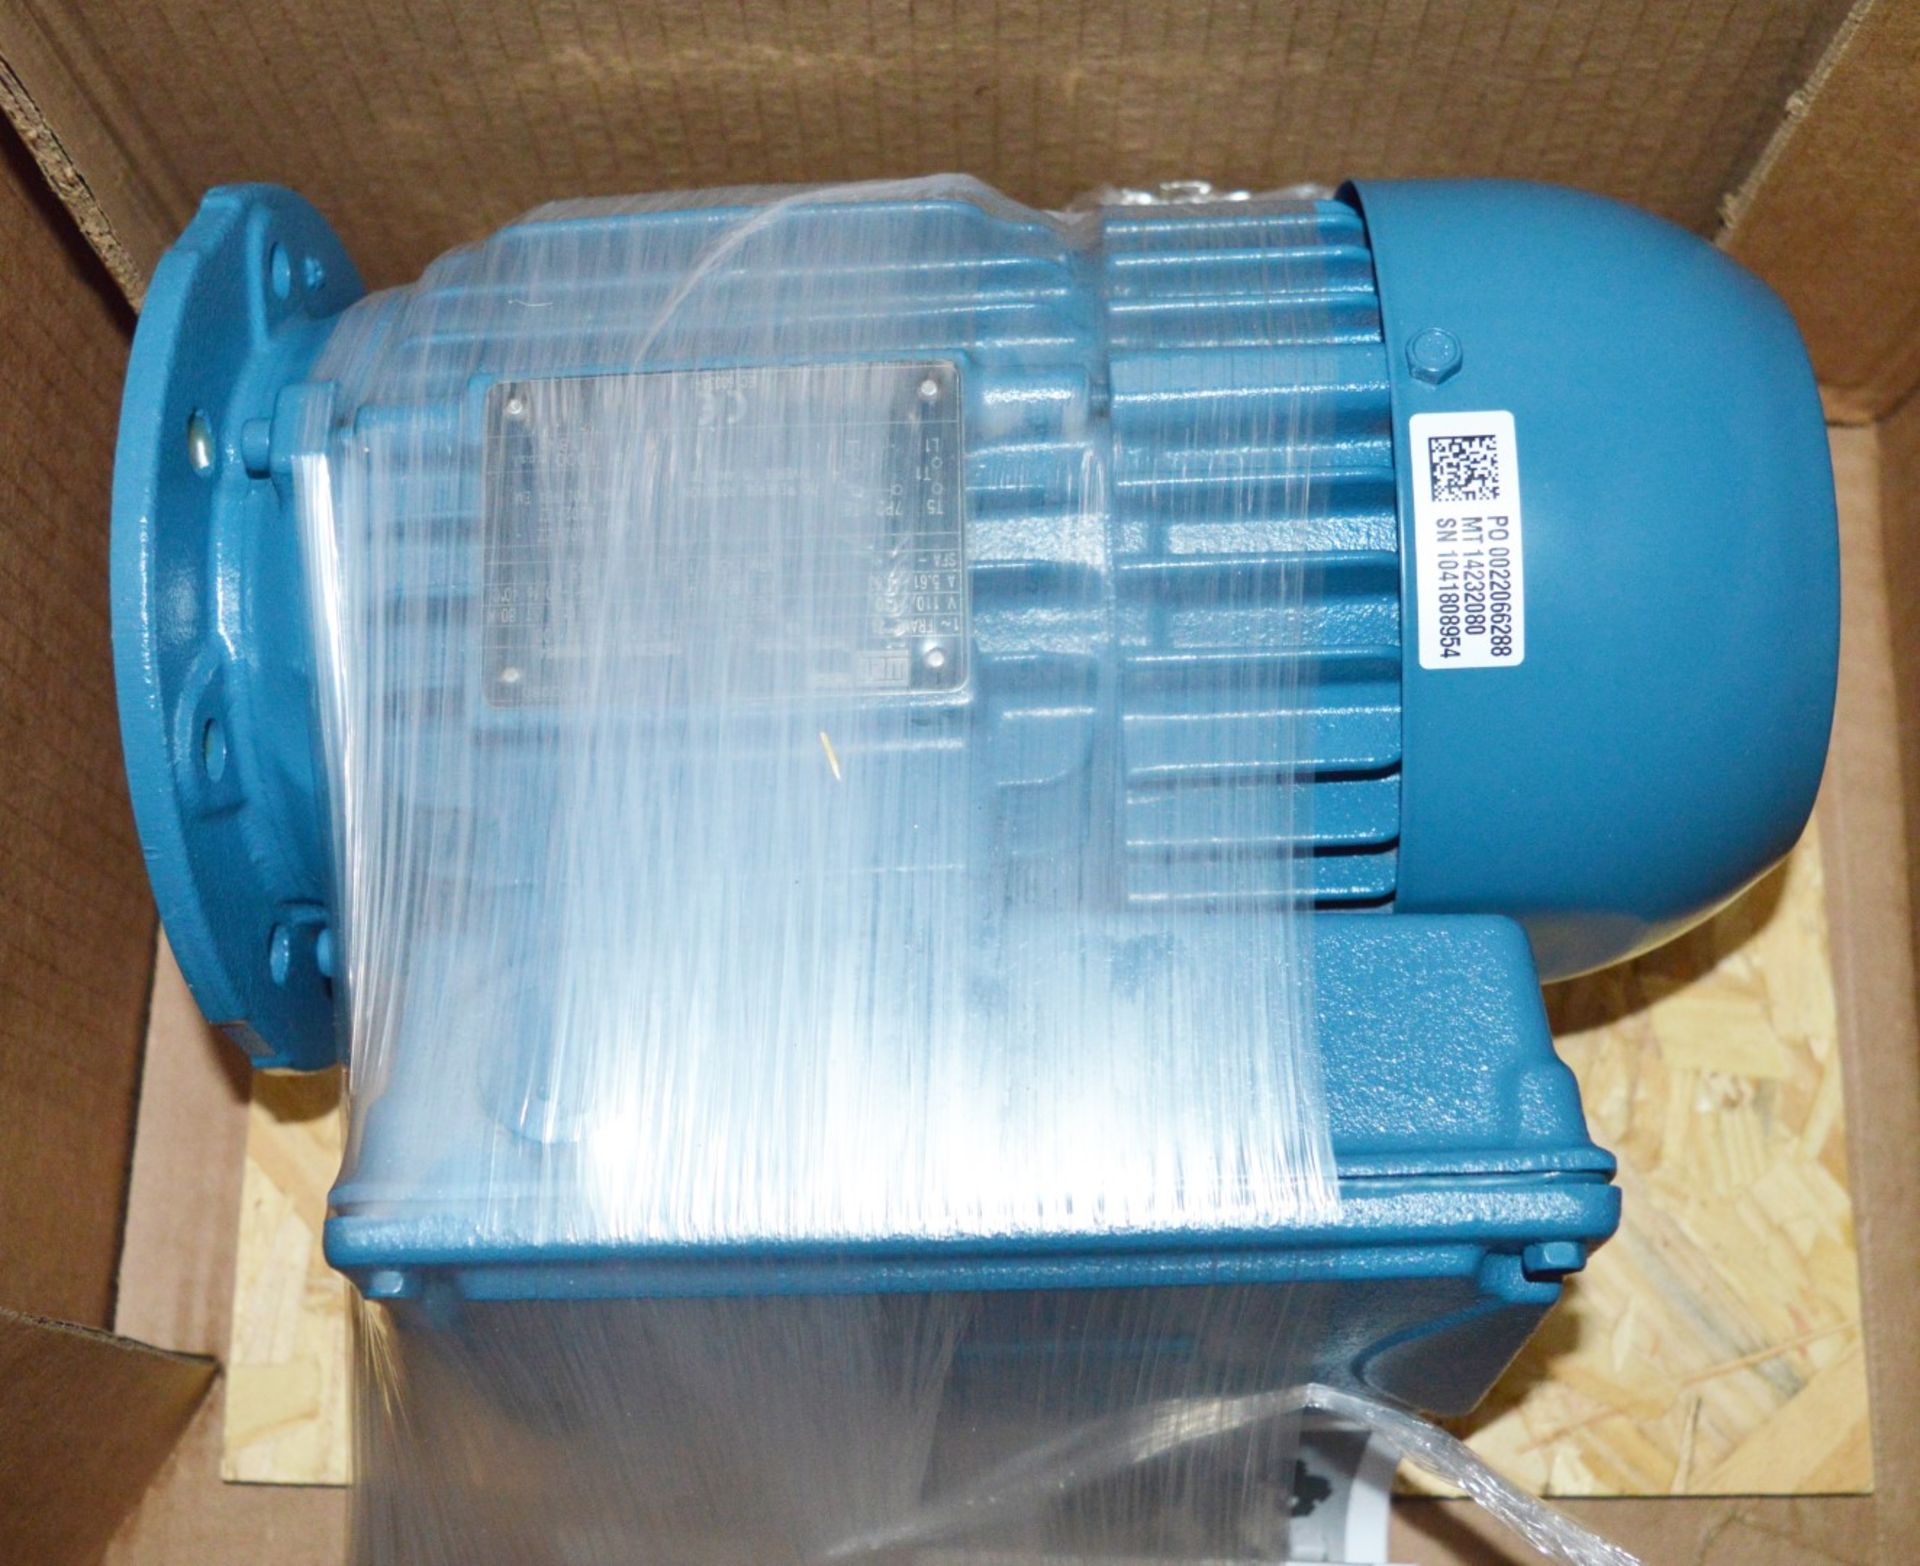 1 x Weg W22 110v IP55 Single Phase Electric Motor - New and Boxed - CL295 - Location: Altrincham - Image 3 of 6